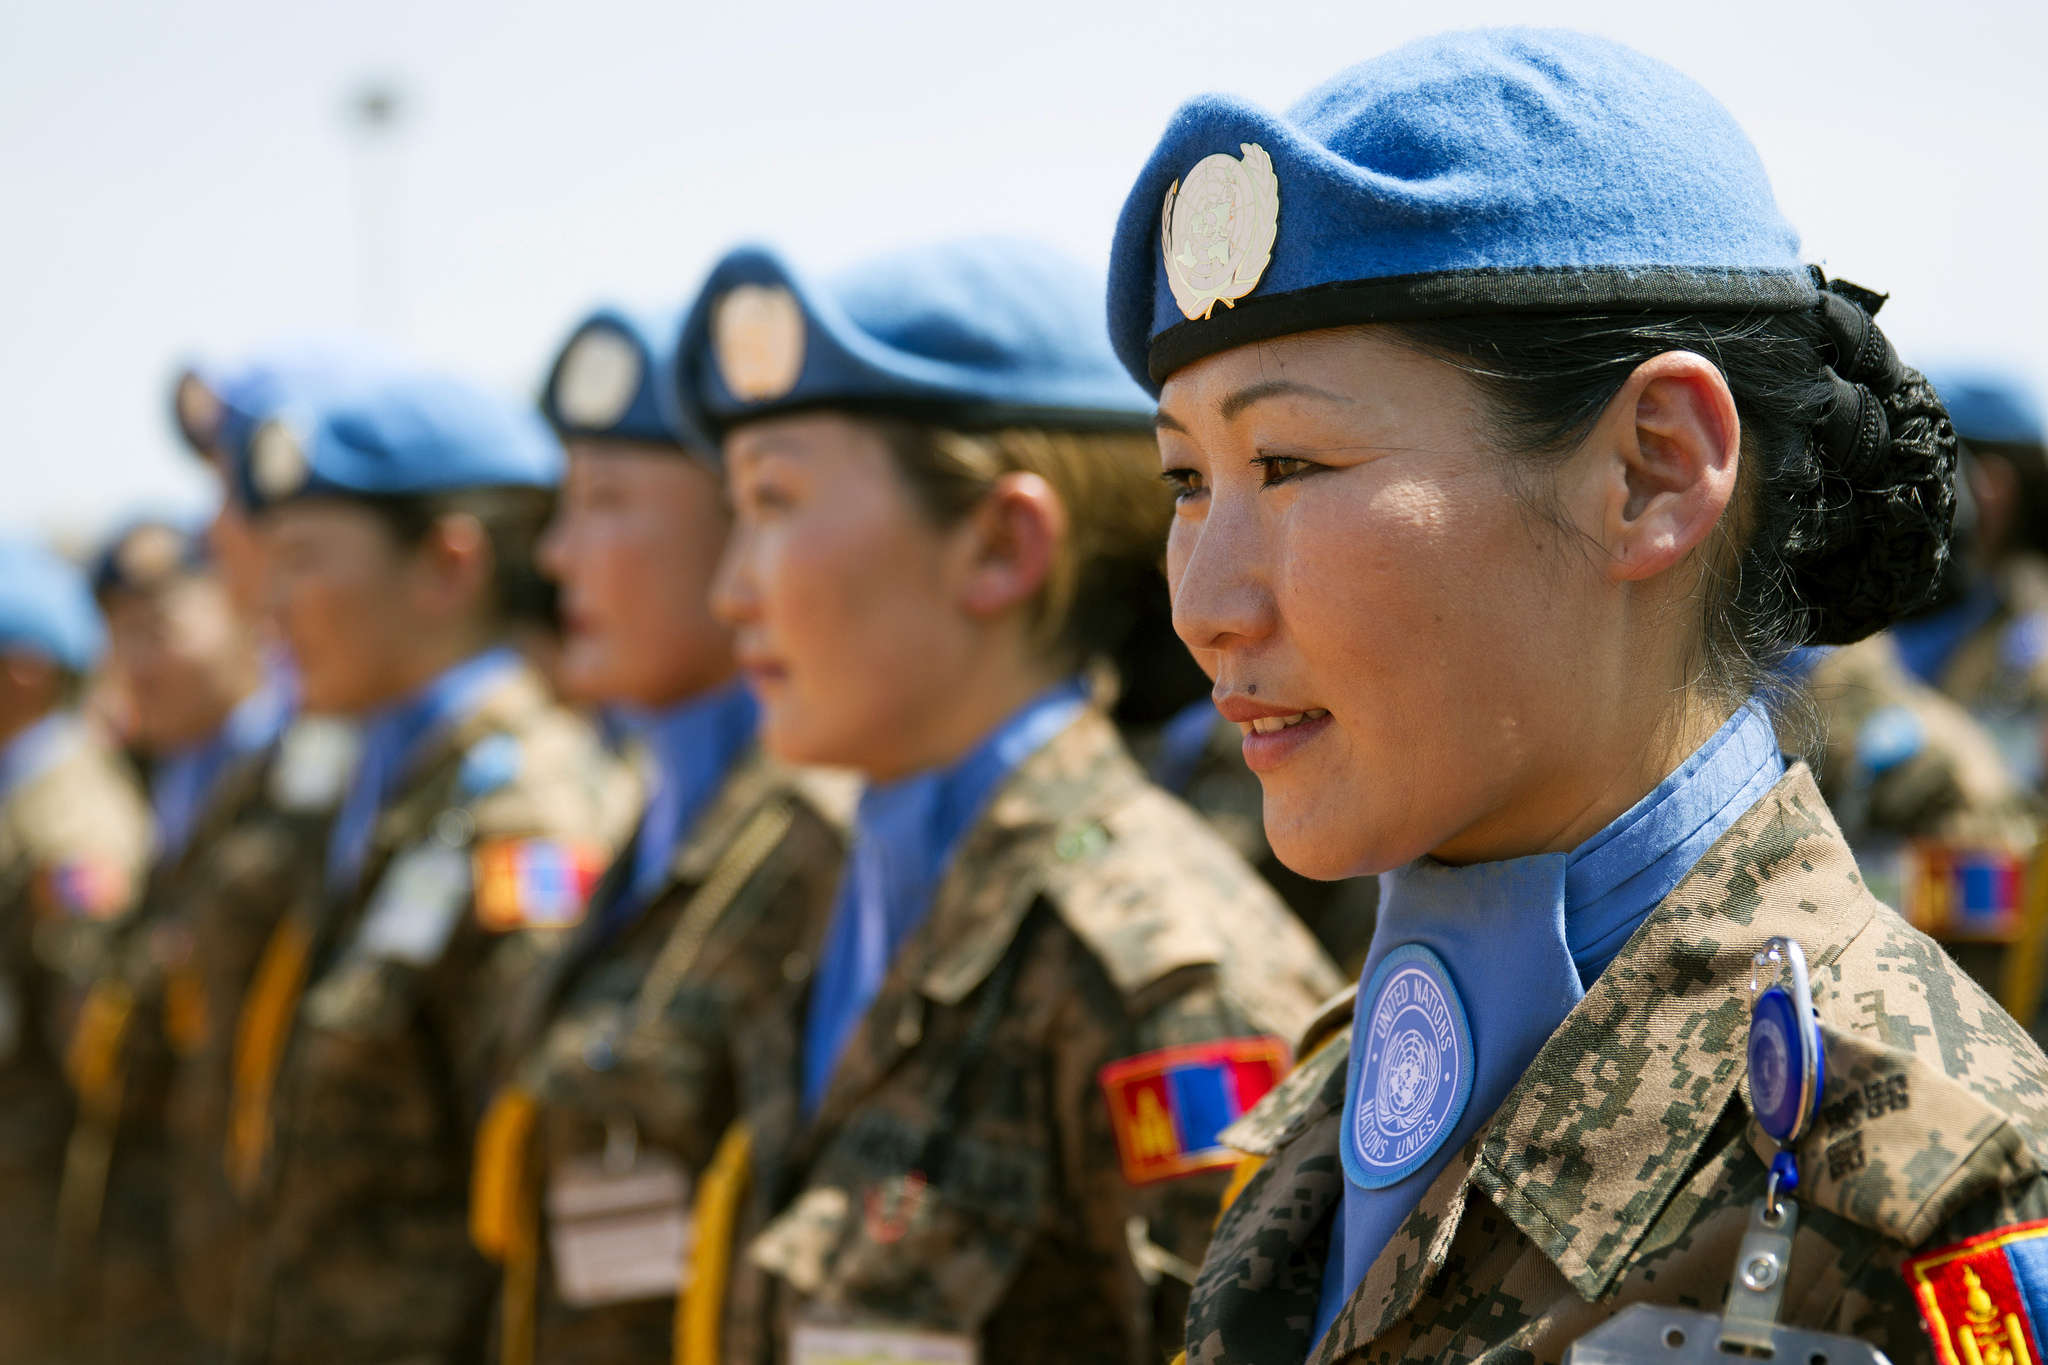 Mongolian peacekeepers of the UN Mission in the Republic of South Sudan sta...